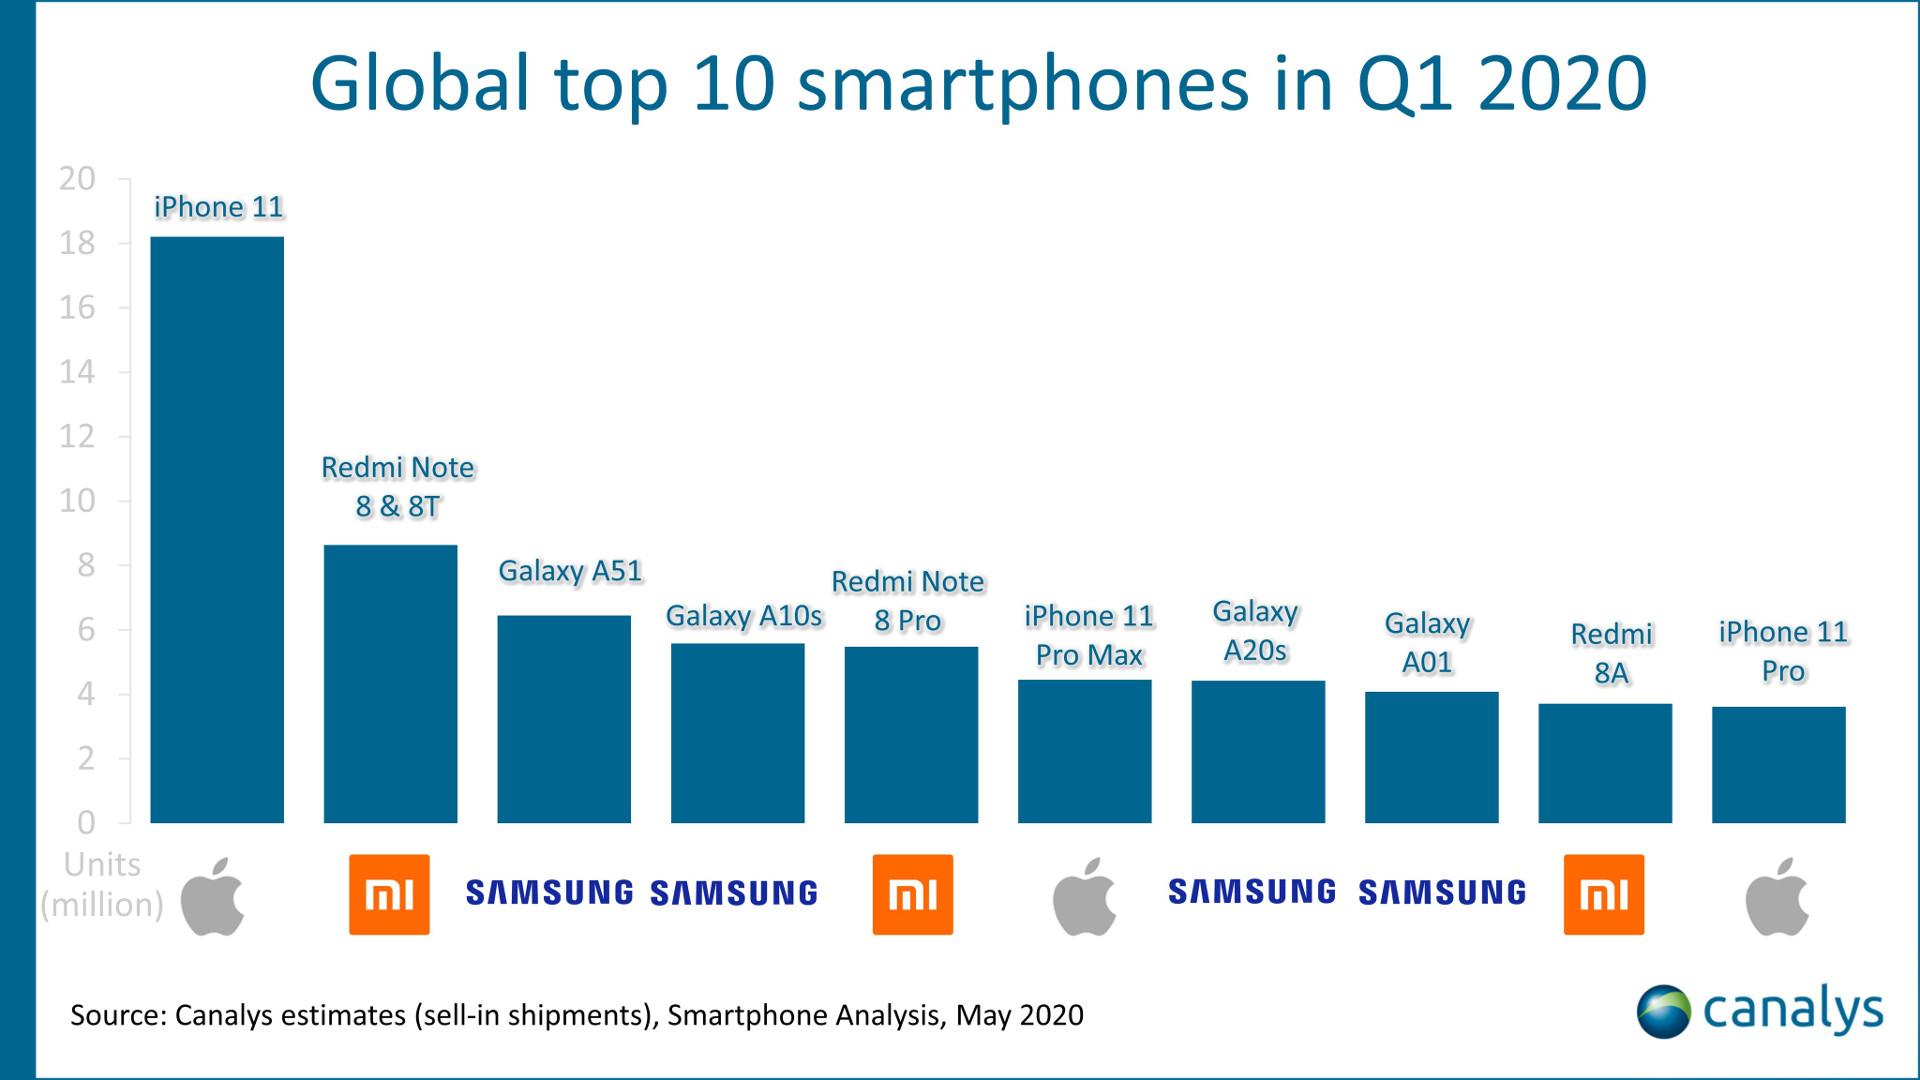 The top ten phones of Q1 2020 according to Canalys.